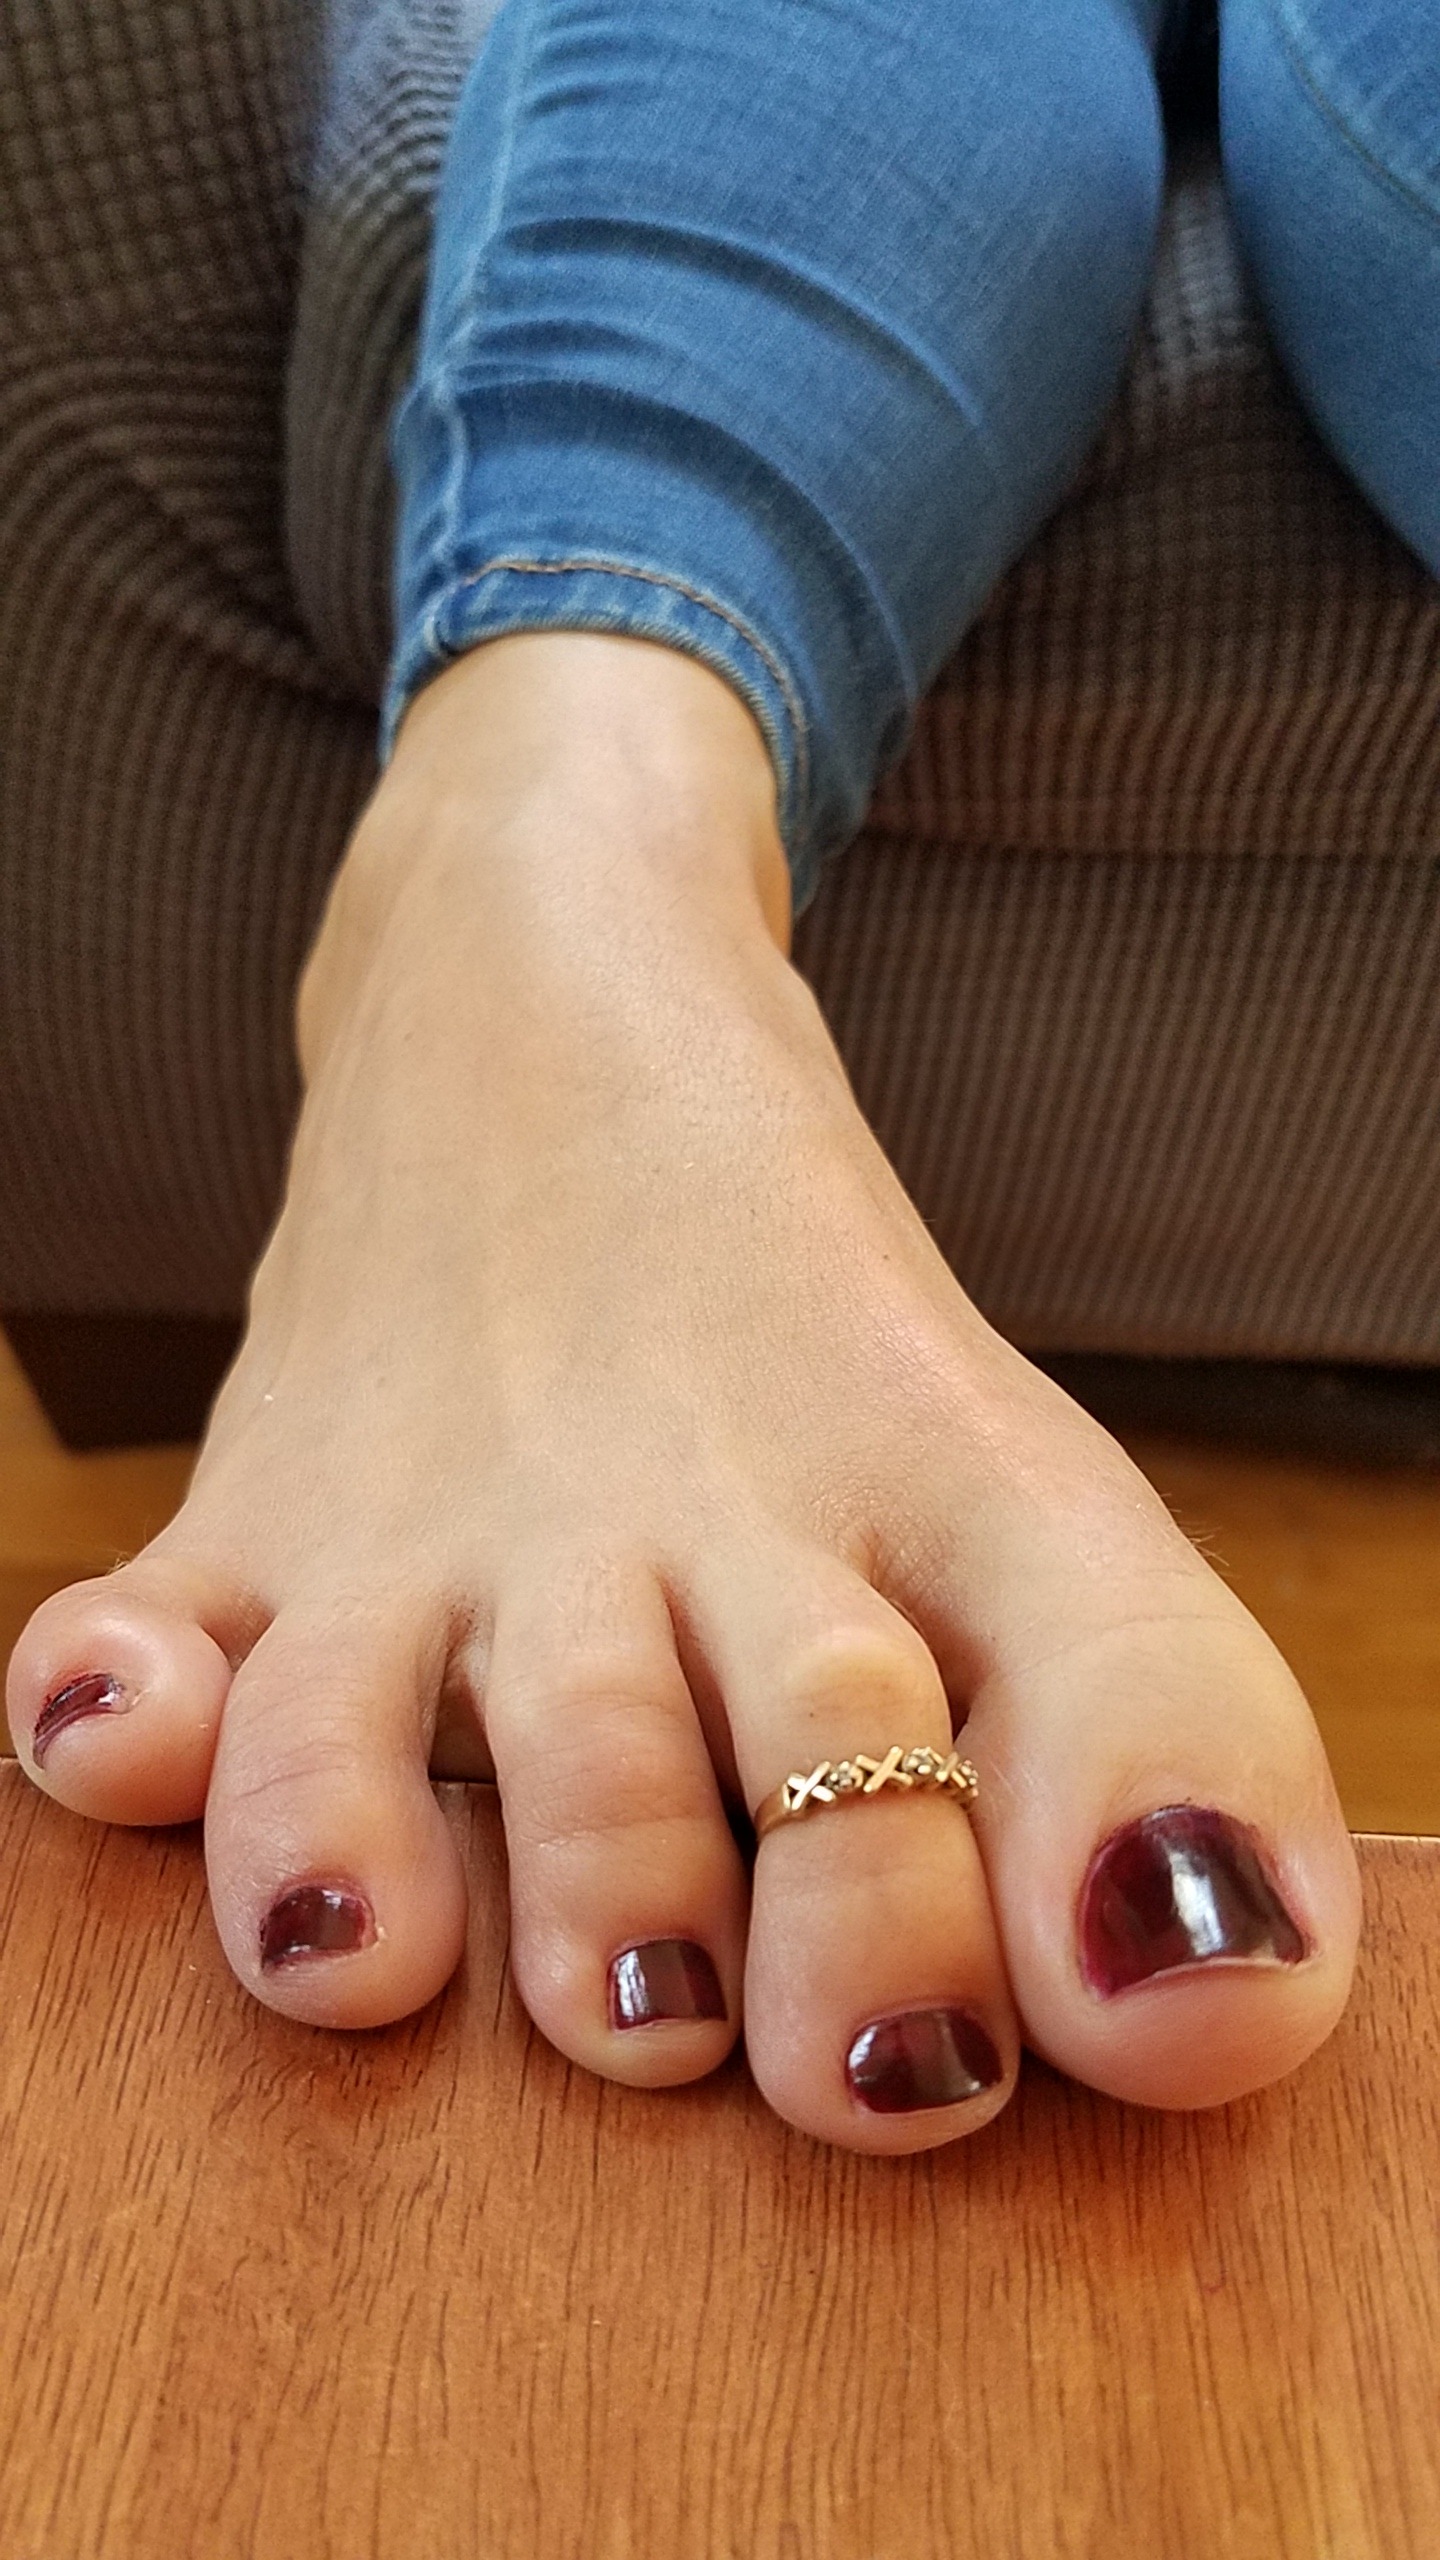 myprettywifesfeet:A cute close up of her porn pictures